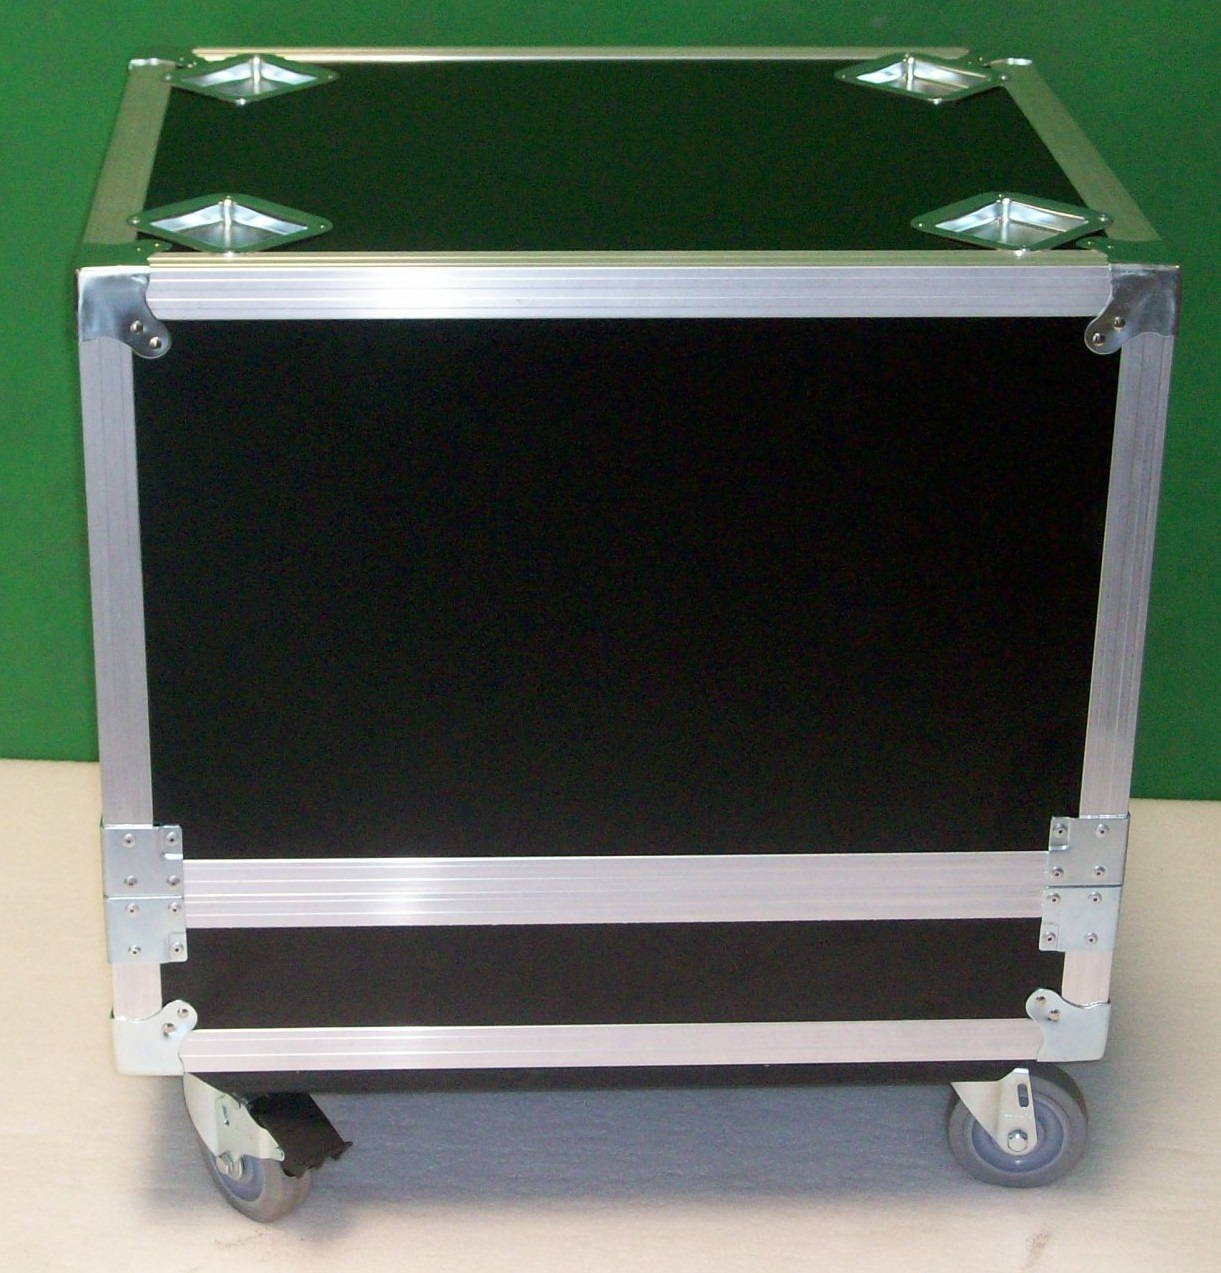 Print # 6260 - Custom Case for (1) K-Array KMT18 Subwoofer By Nelson Case Corp